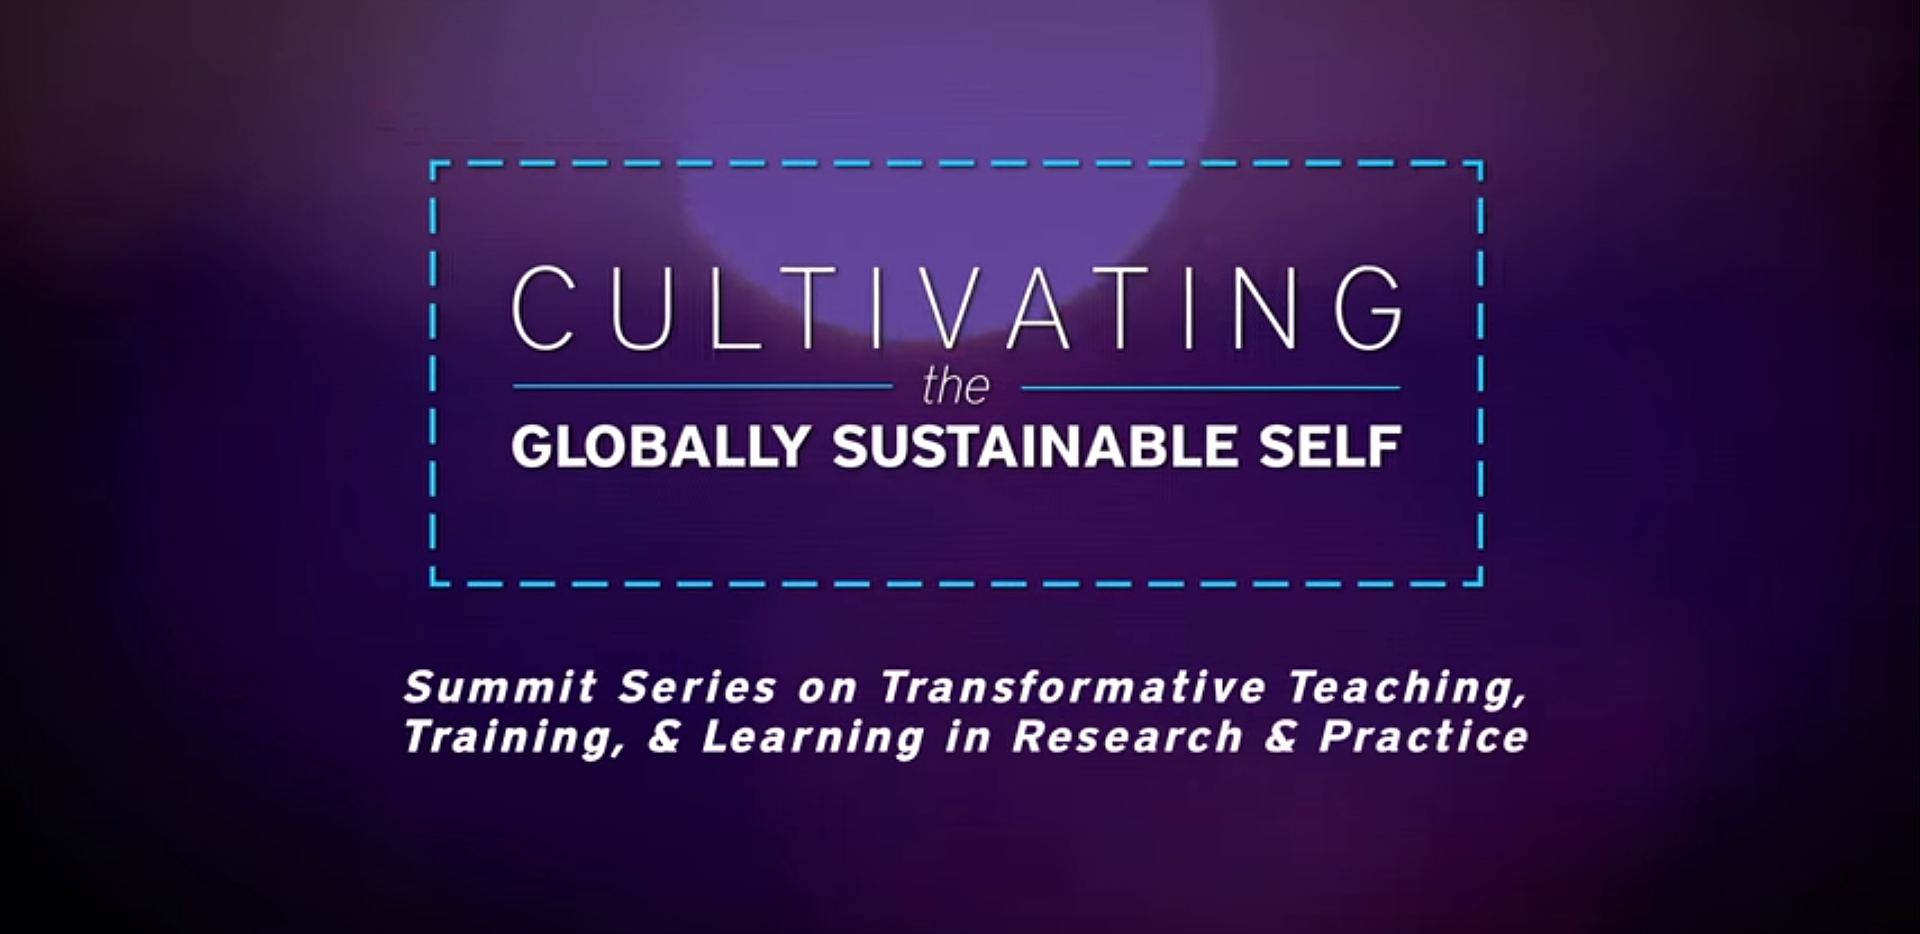 Cultivating the Globally Sustainable Self Summit Series on Transformative Teaching, Training, and Learning in Research and Practice